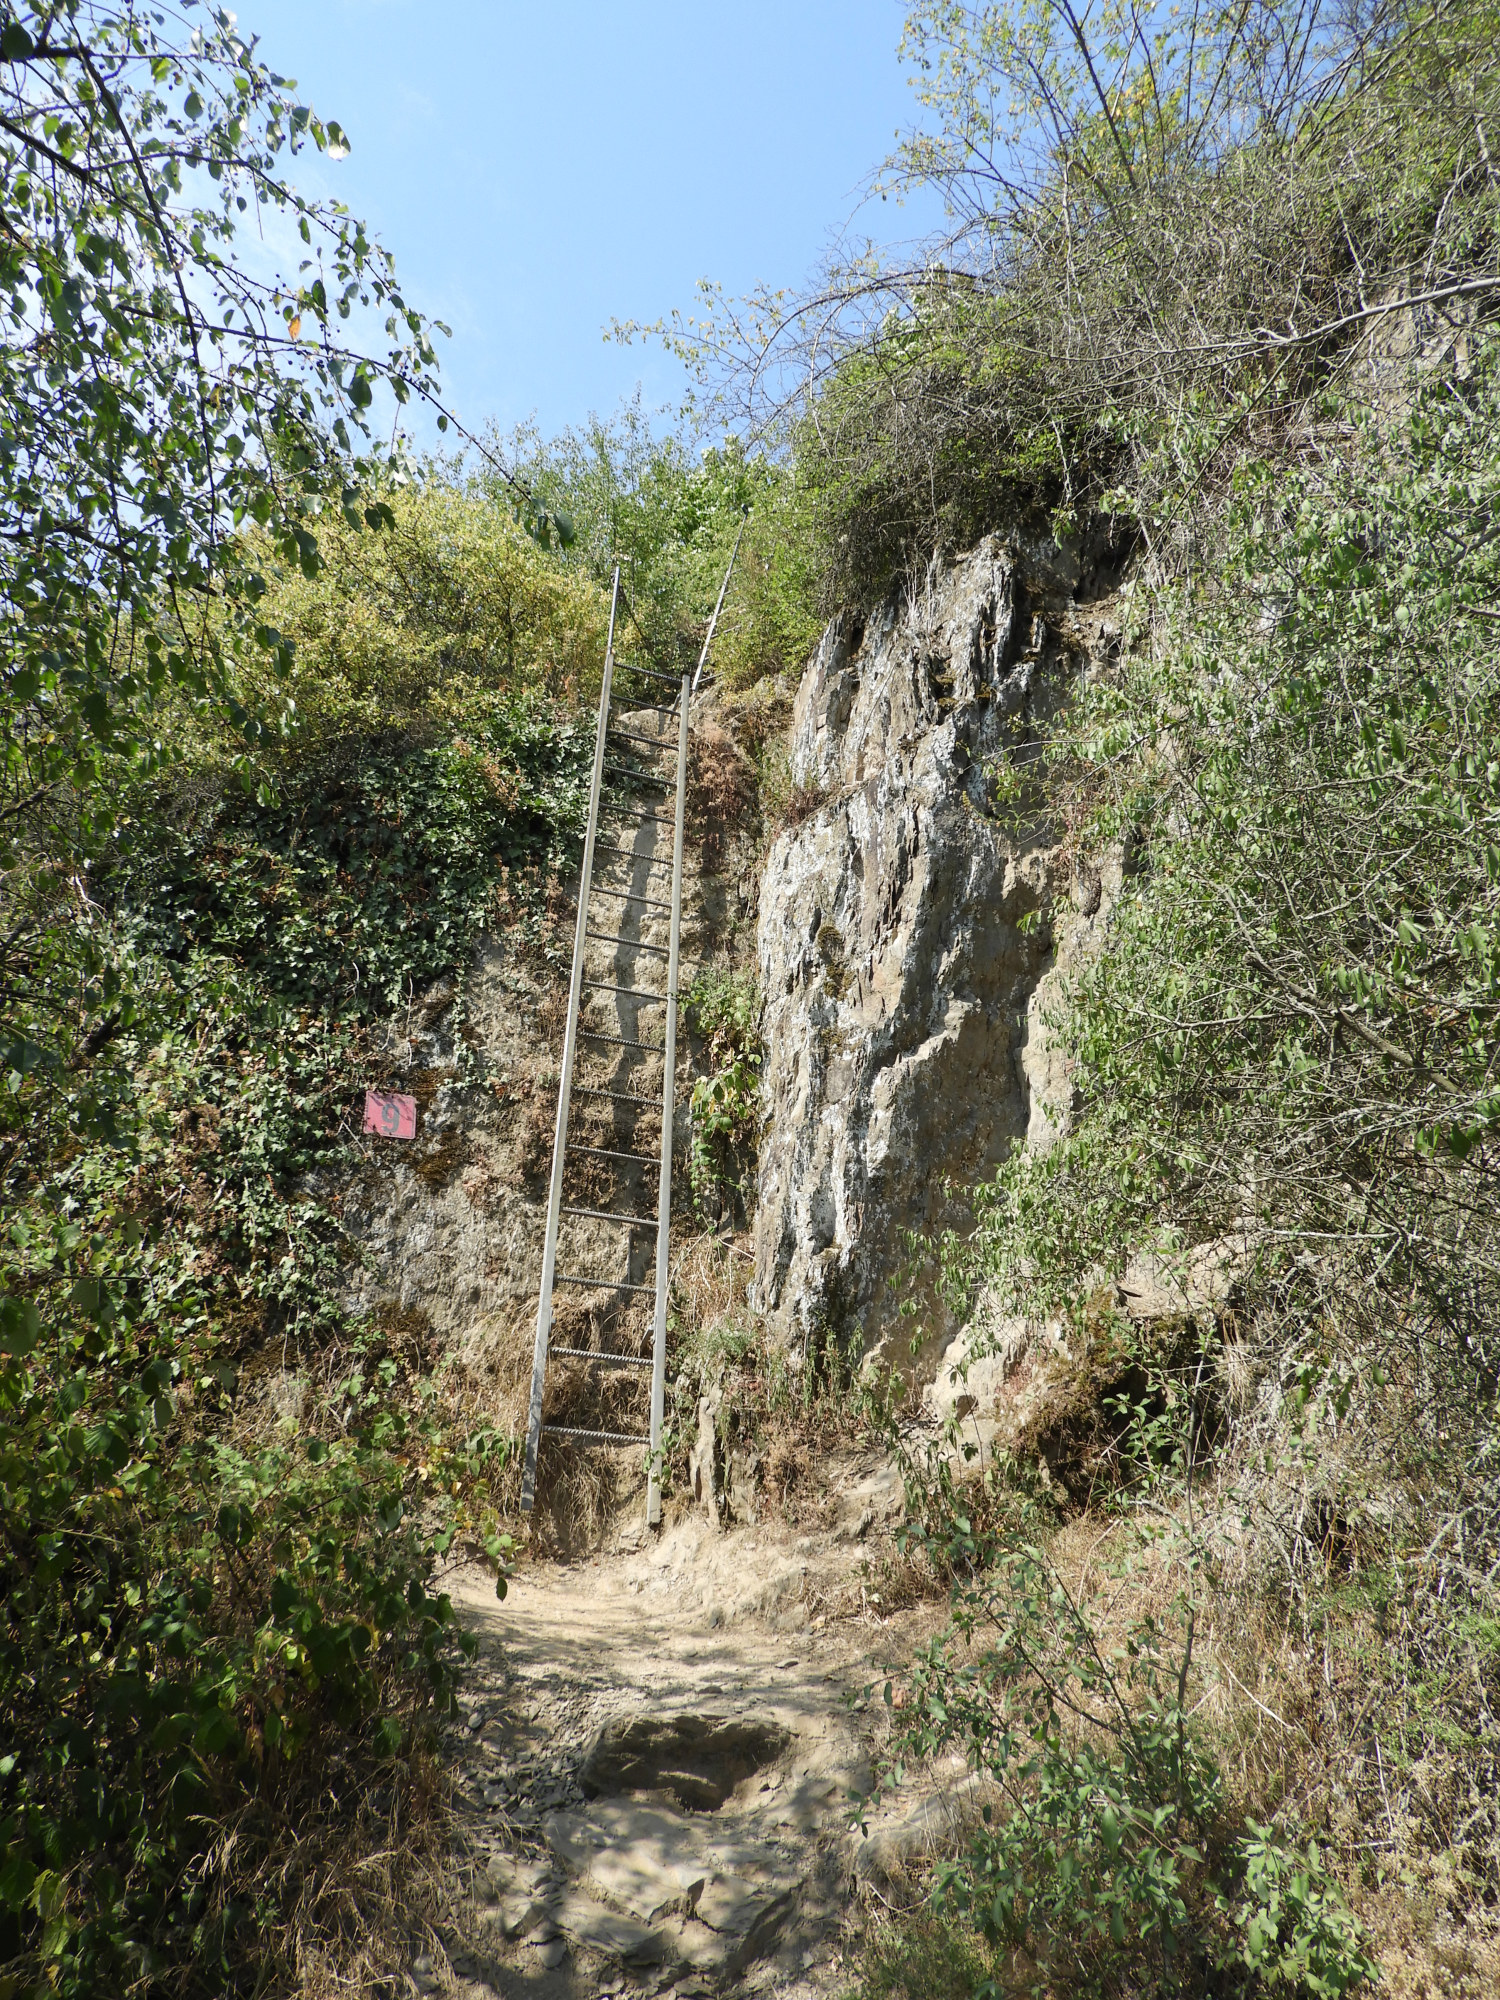 The first ladder on the Klettervariante